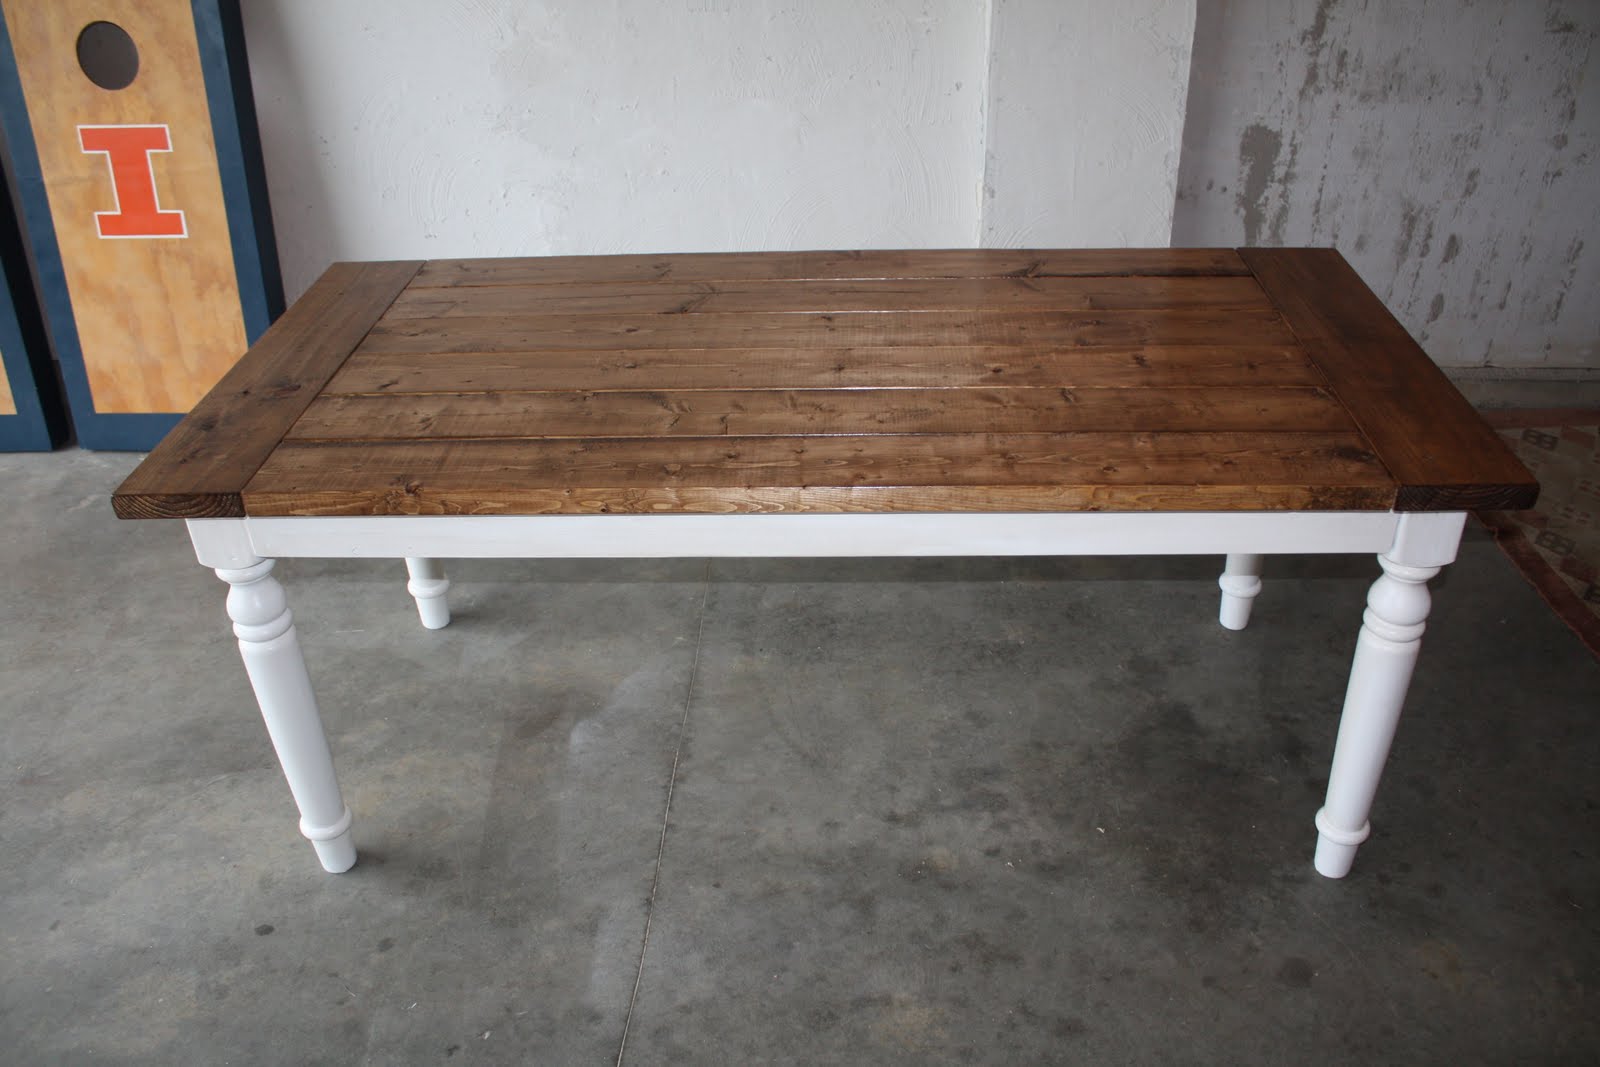 And now: presenting my hand-made Rustic Farm House Table!